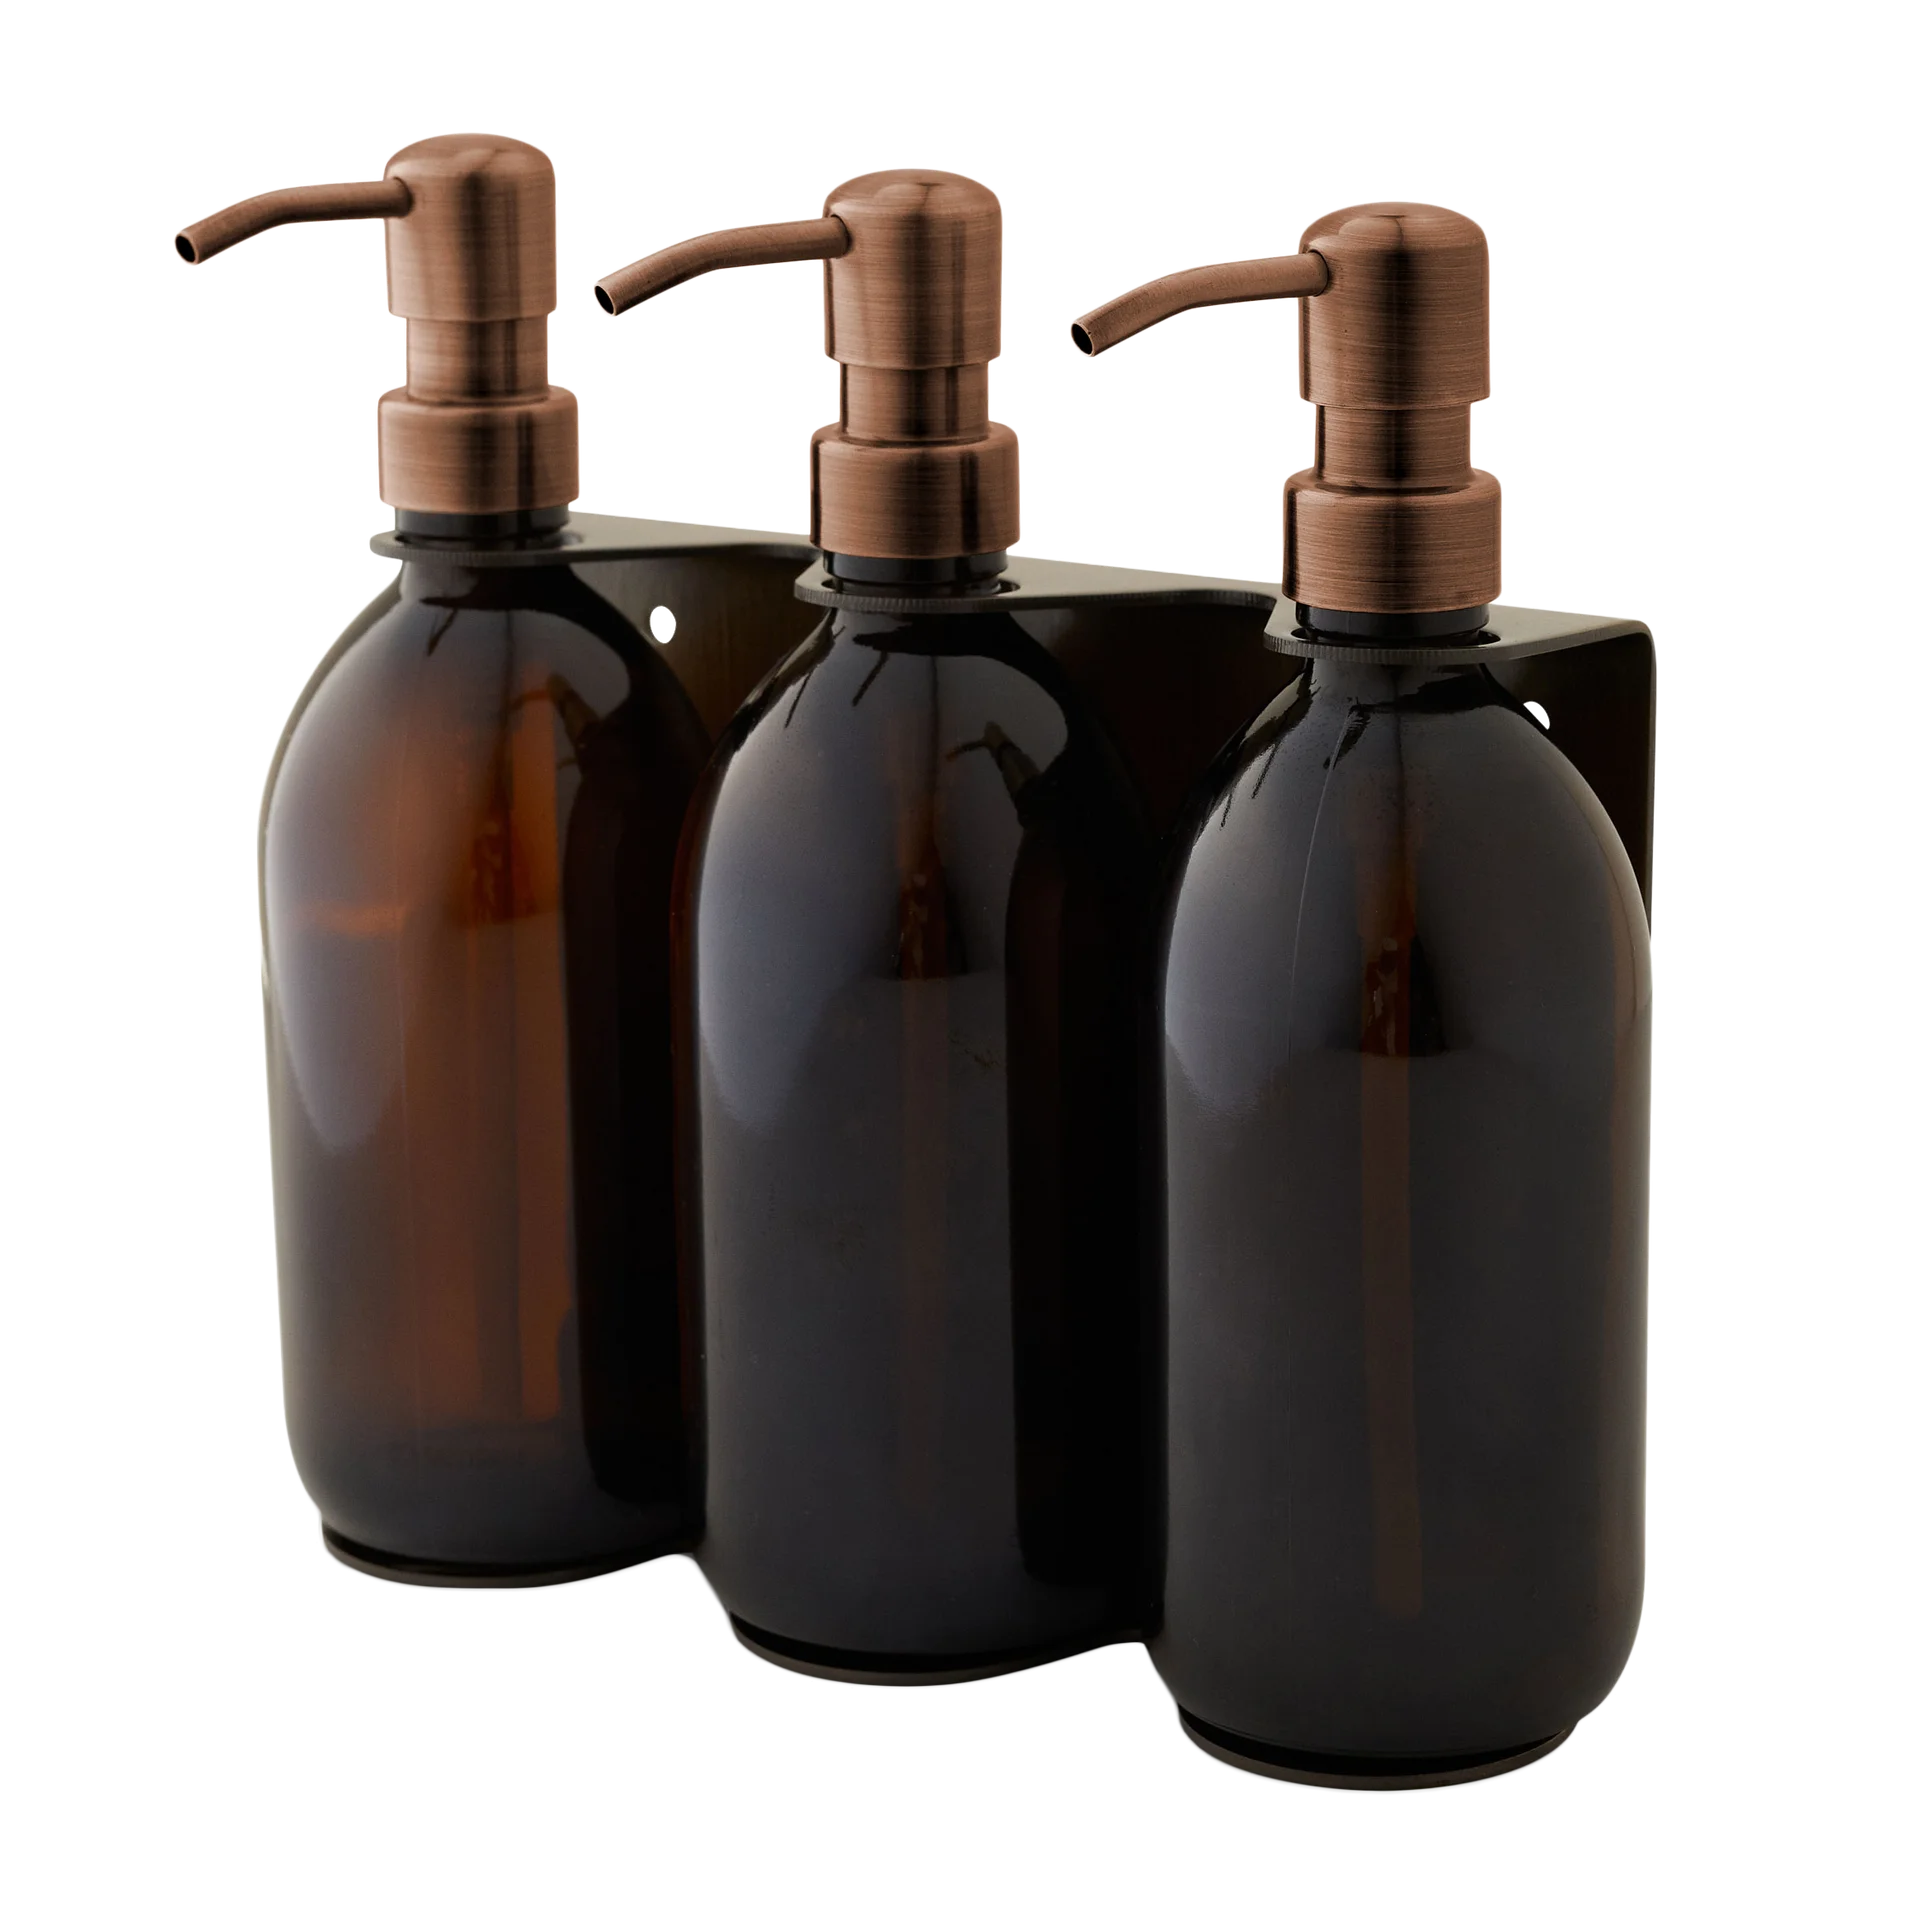 Gold Triple Refillable Wall Mounted Soap Dispenser 500ml amber dispenser and Bronze pumps